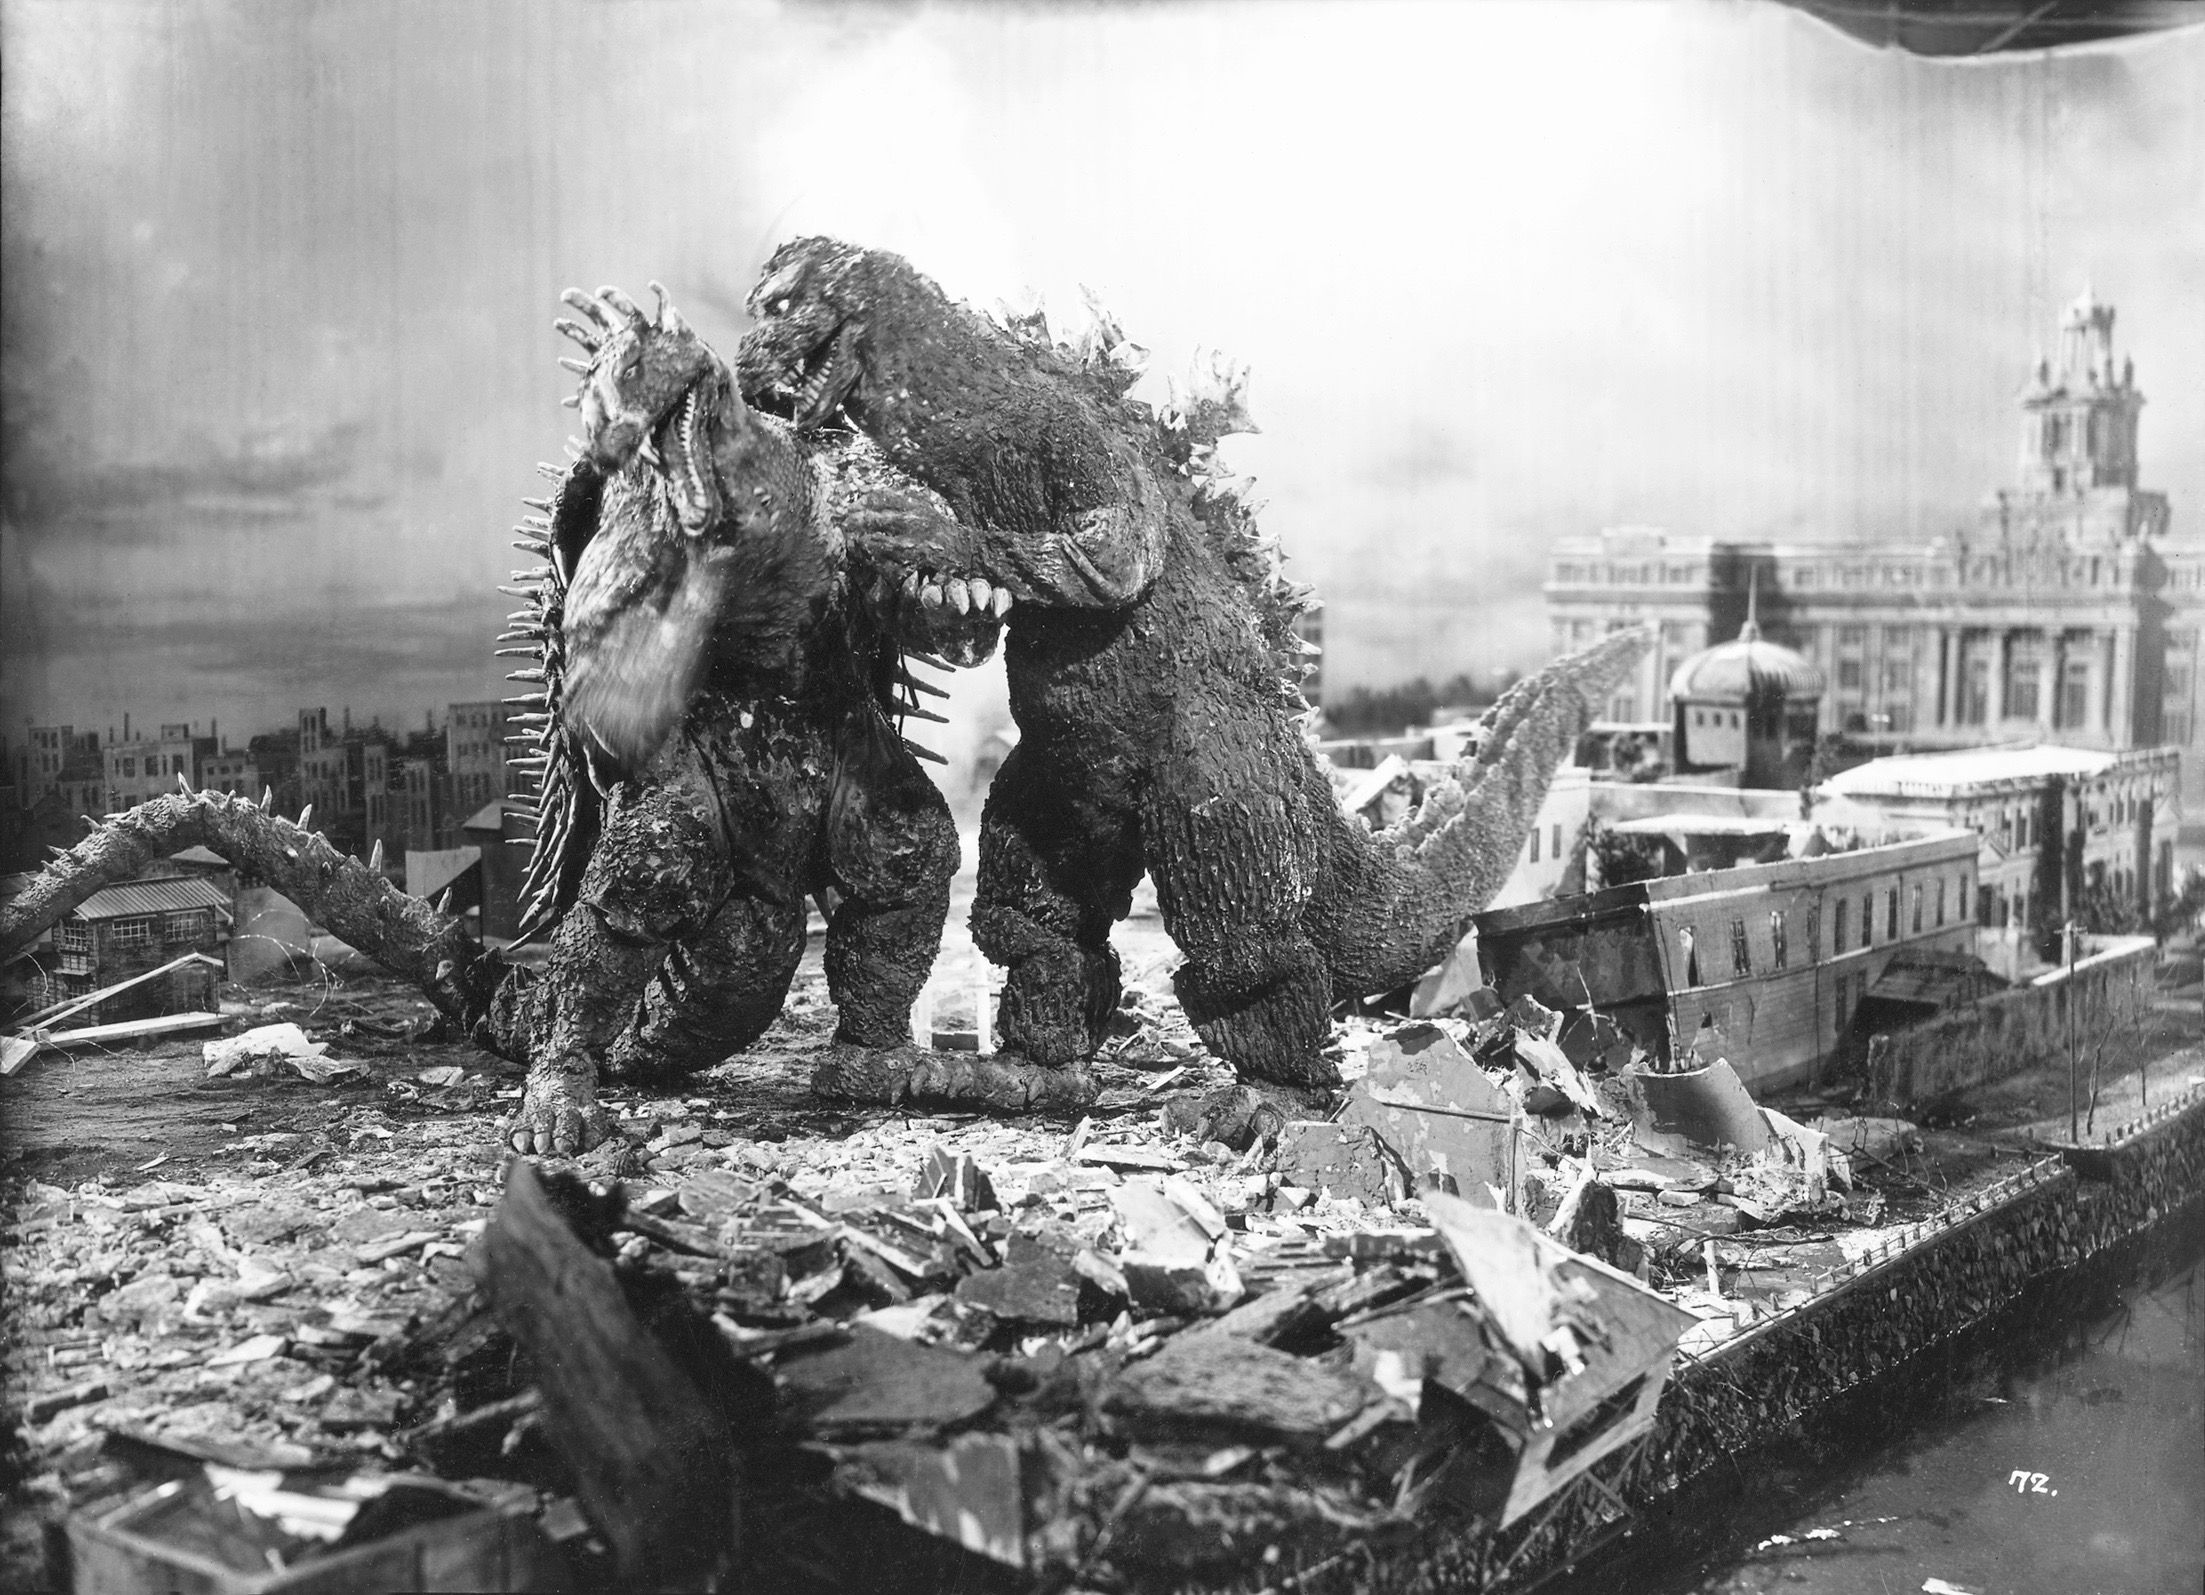 Happy birthday, Godzilla! The iconic monster is 65 years old